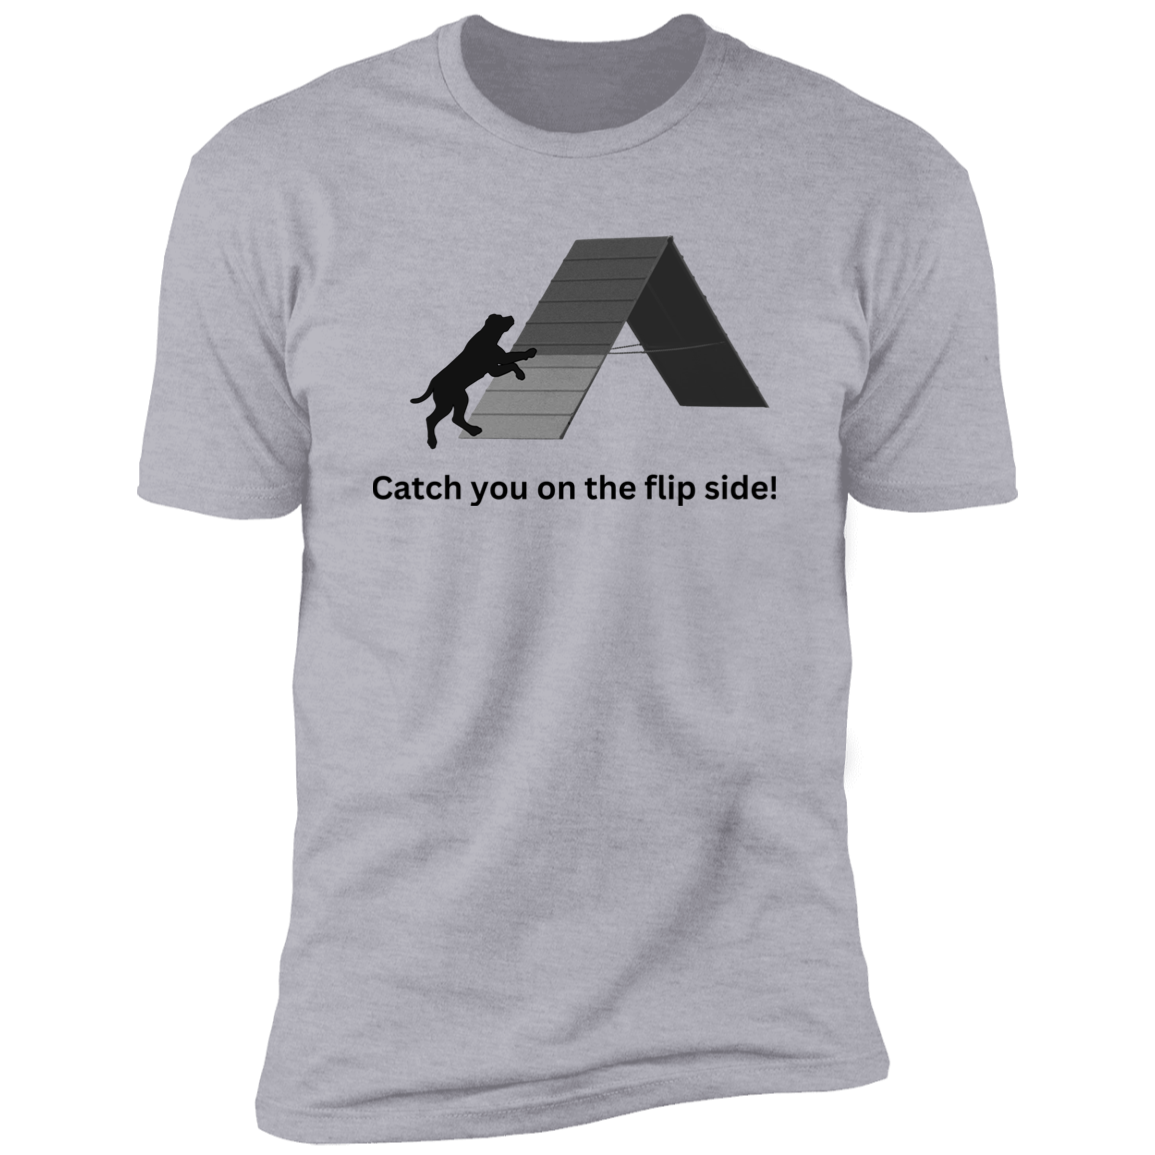 Catch You on the Flip Side T-shirt, Dog Agility Shirt for humans, in light heather gray